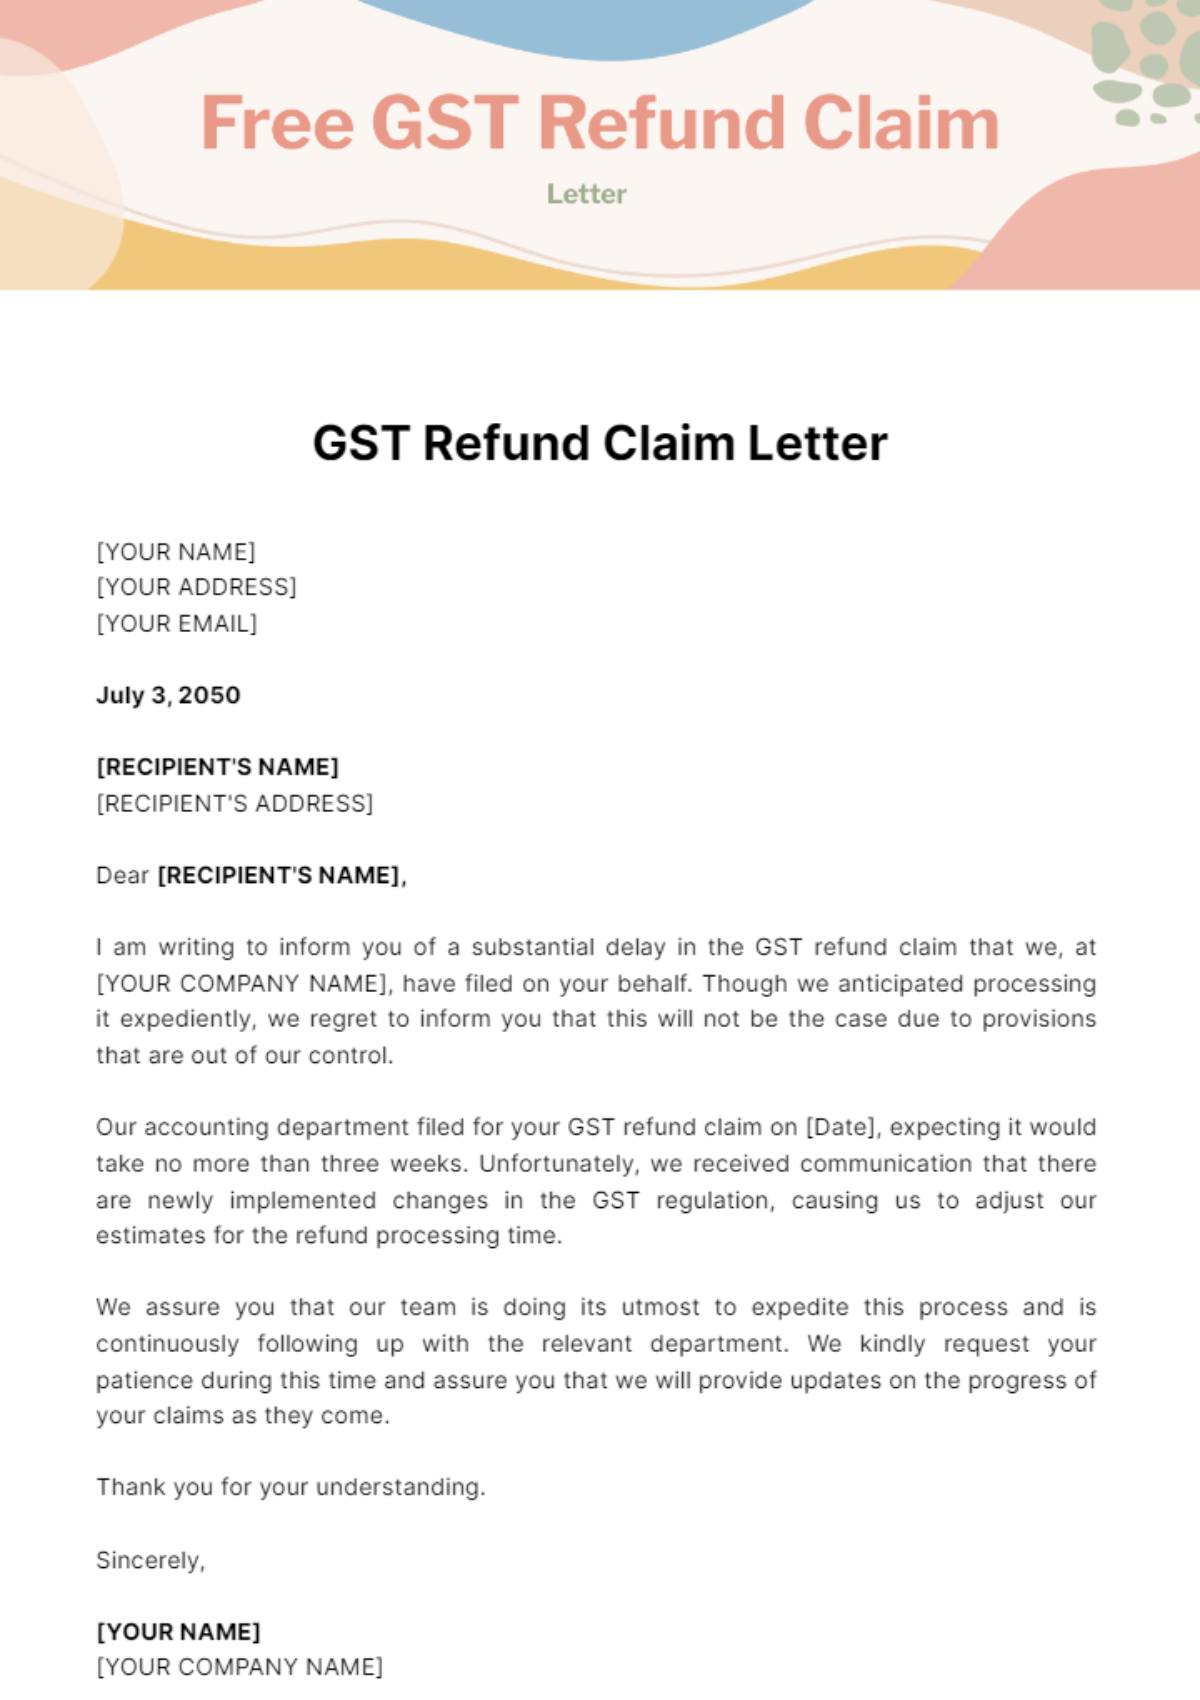 Free GST Refund Claim Letter Template